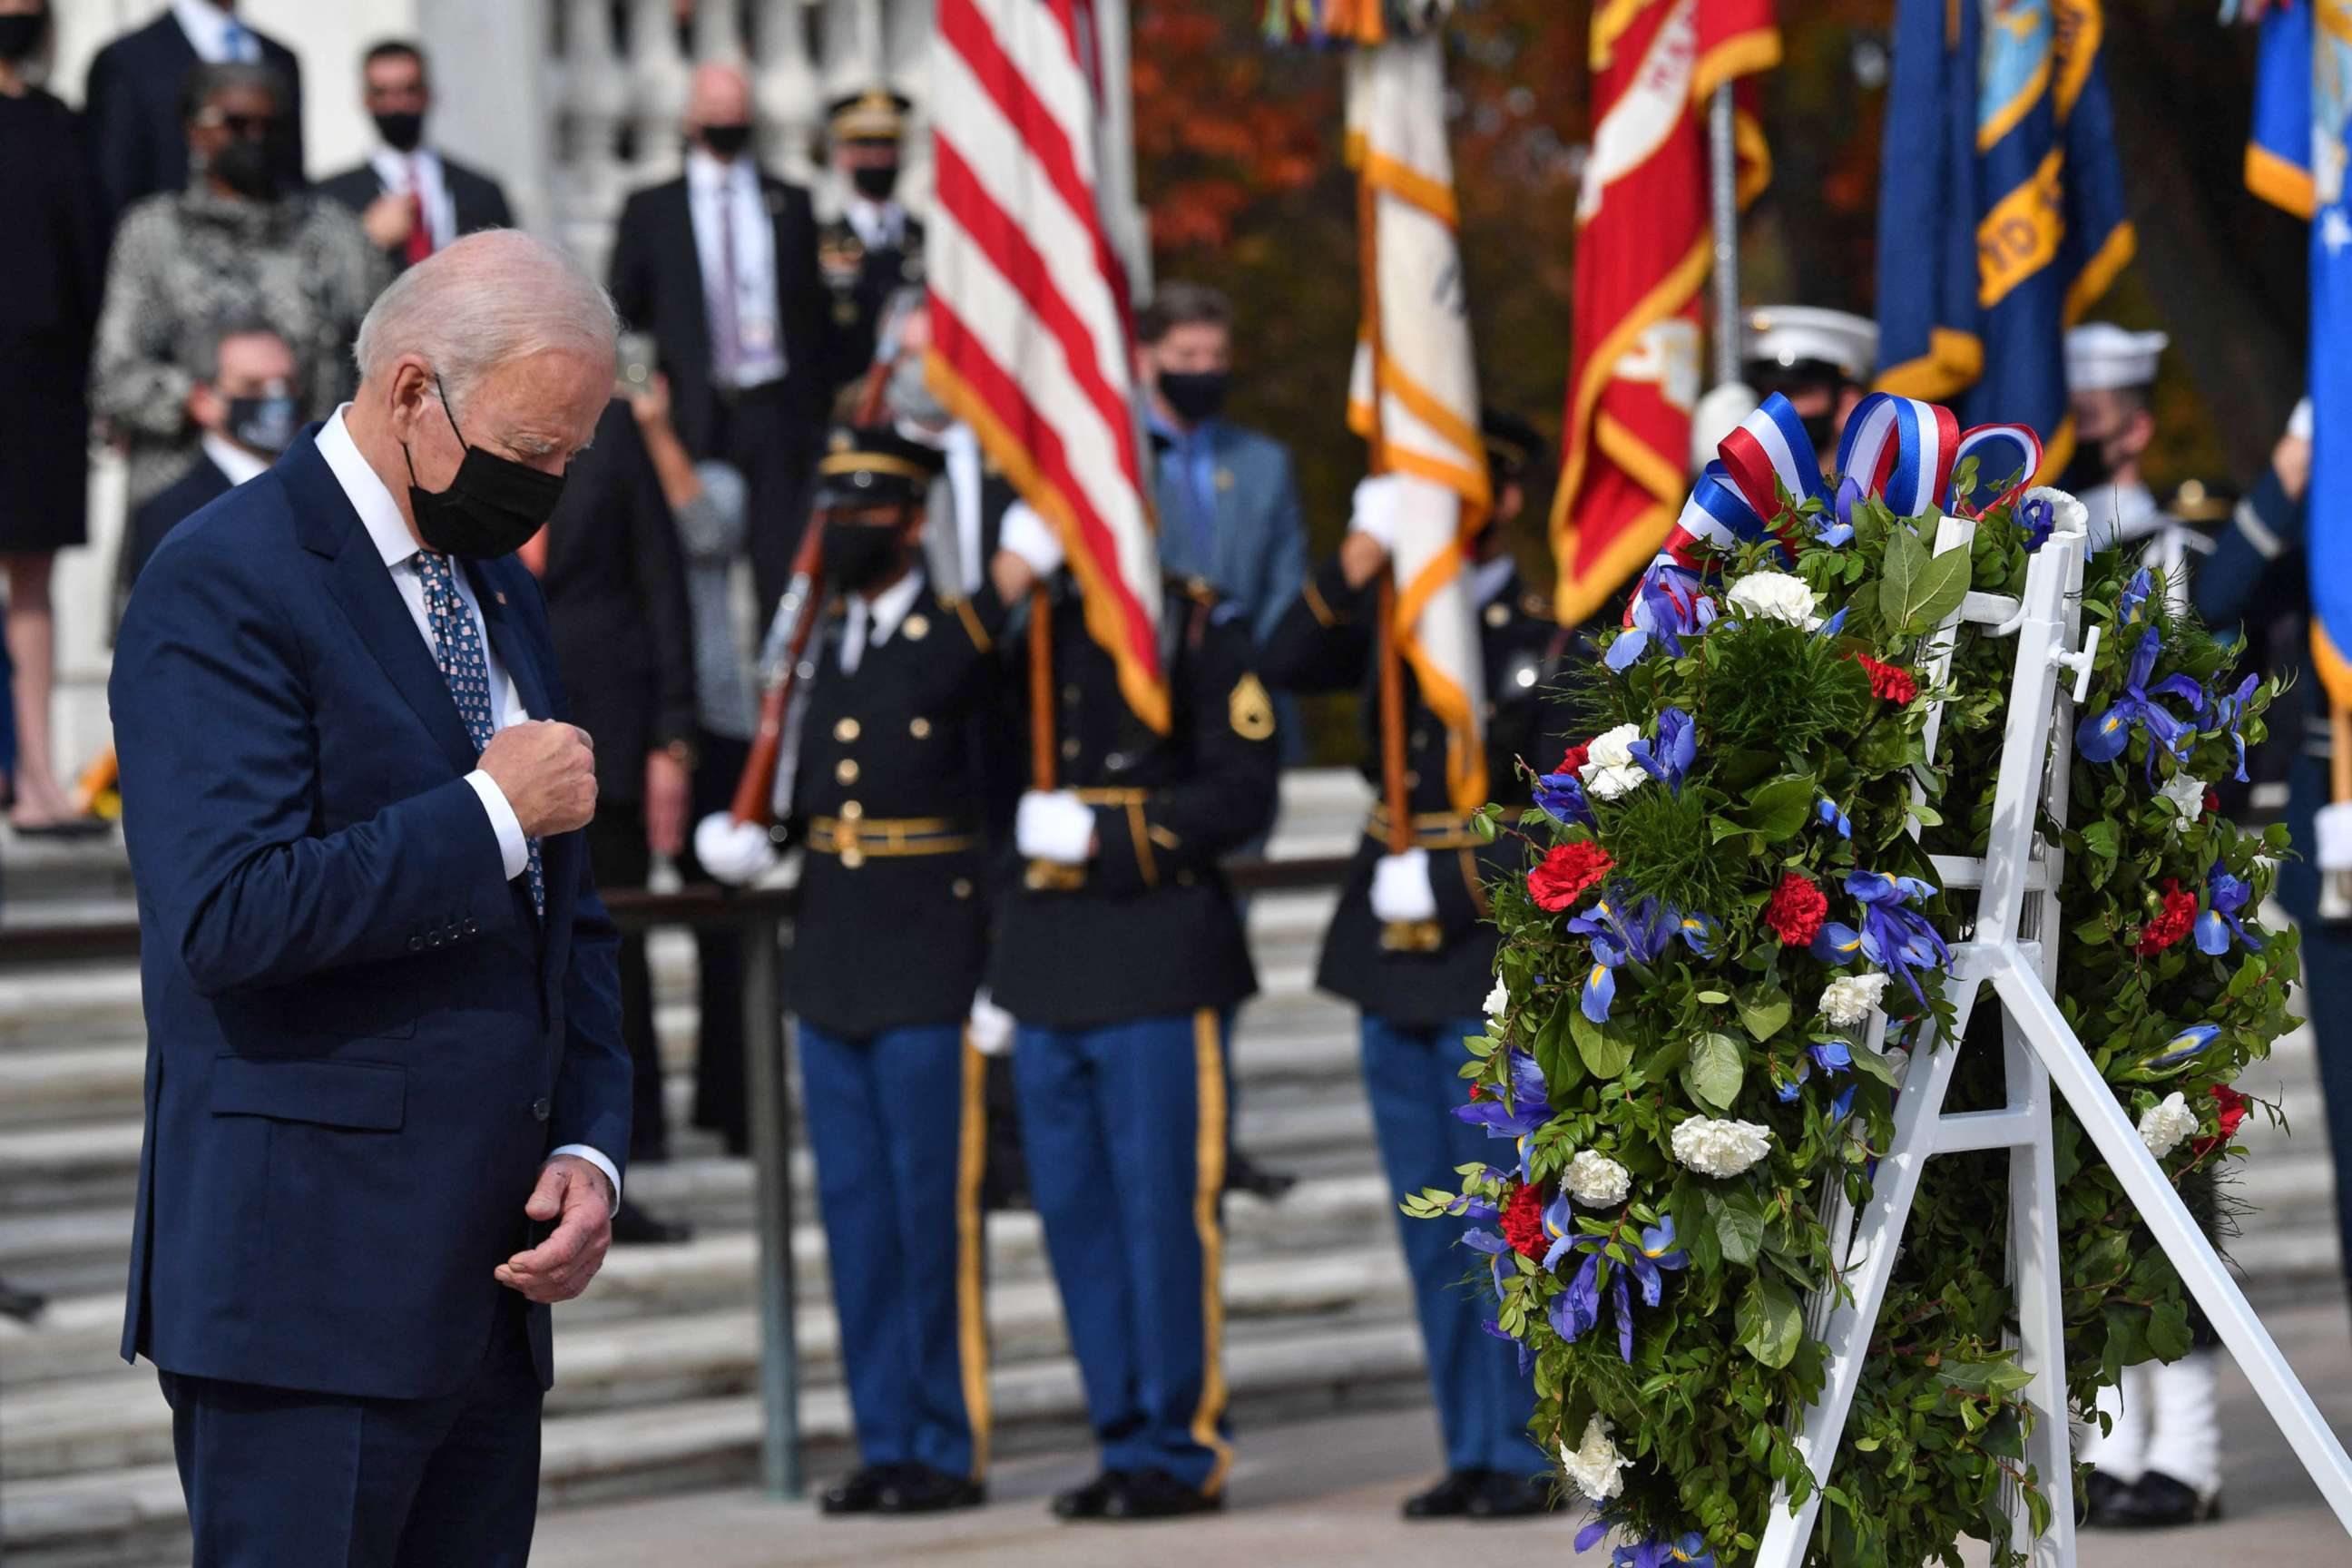 PHOTO: President Joe Biden bows his head during a wreath laying ceremony at The Tomb of the Unknown Soldier to commemorate Veterans Day at Arlington National Cemetery in Arlington, Va., Nov. 11, 2021.